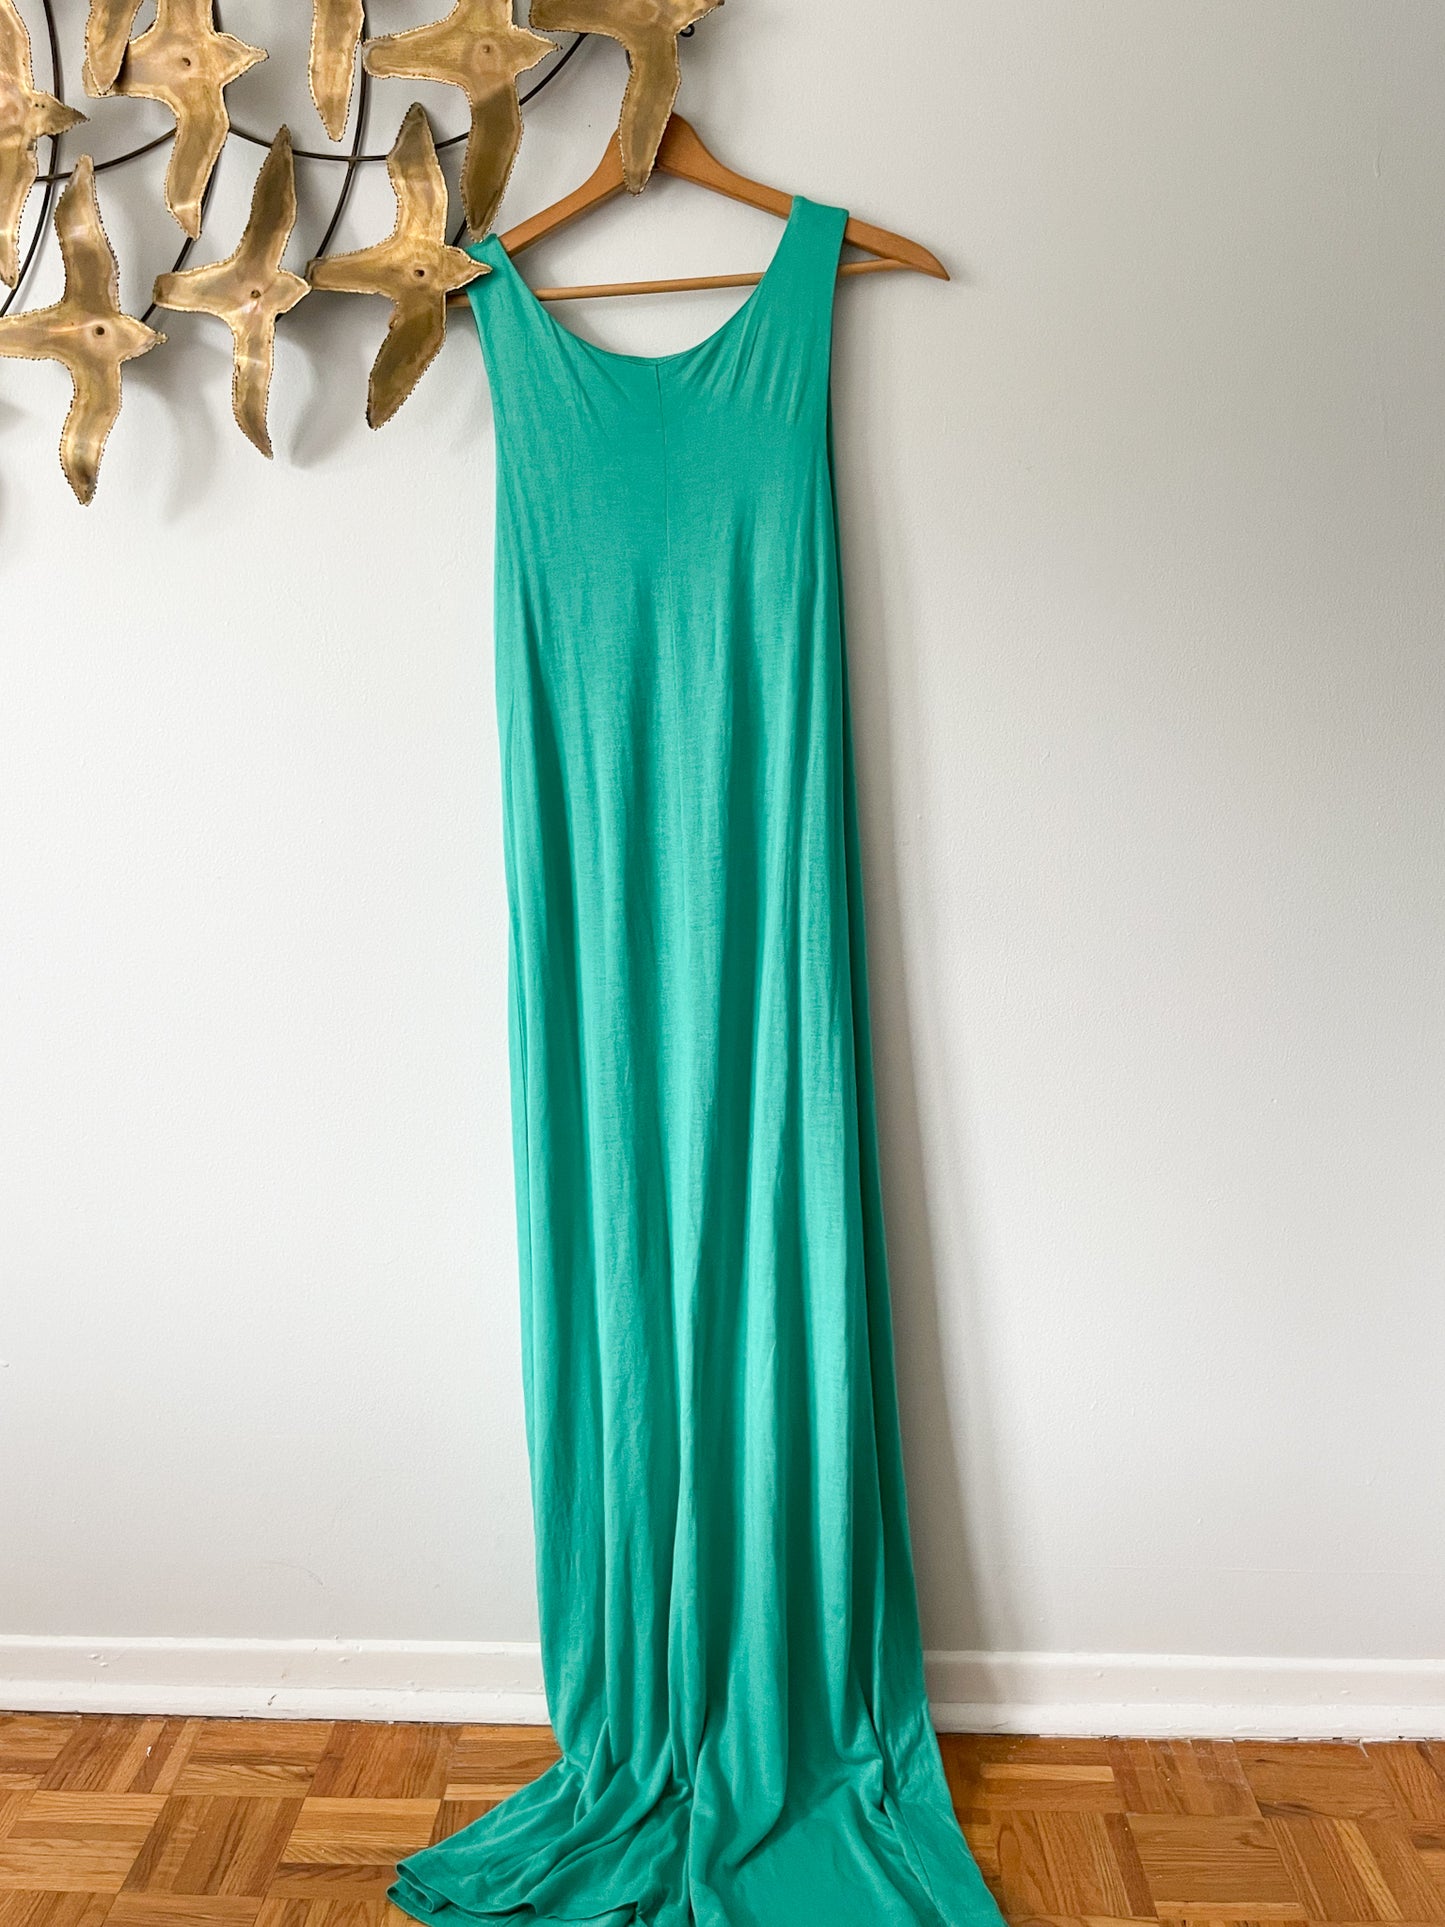 Charlie Paige Green Jersey Maxi Dress NWT - S/M